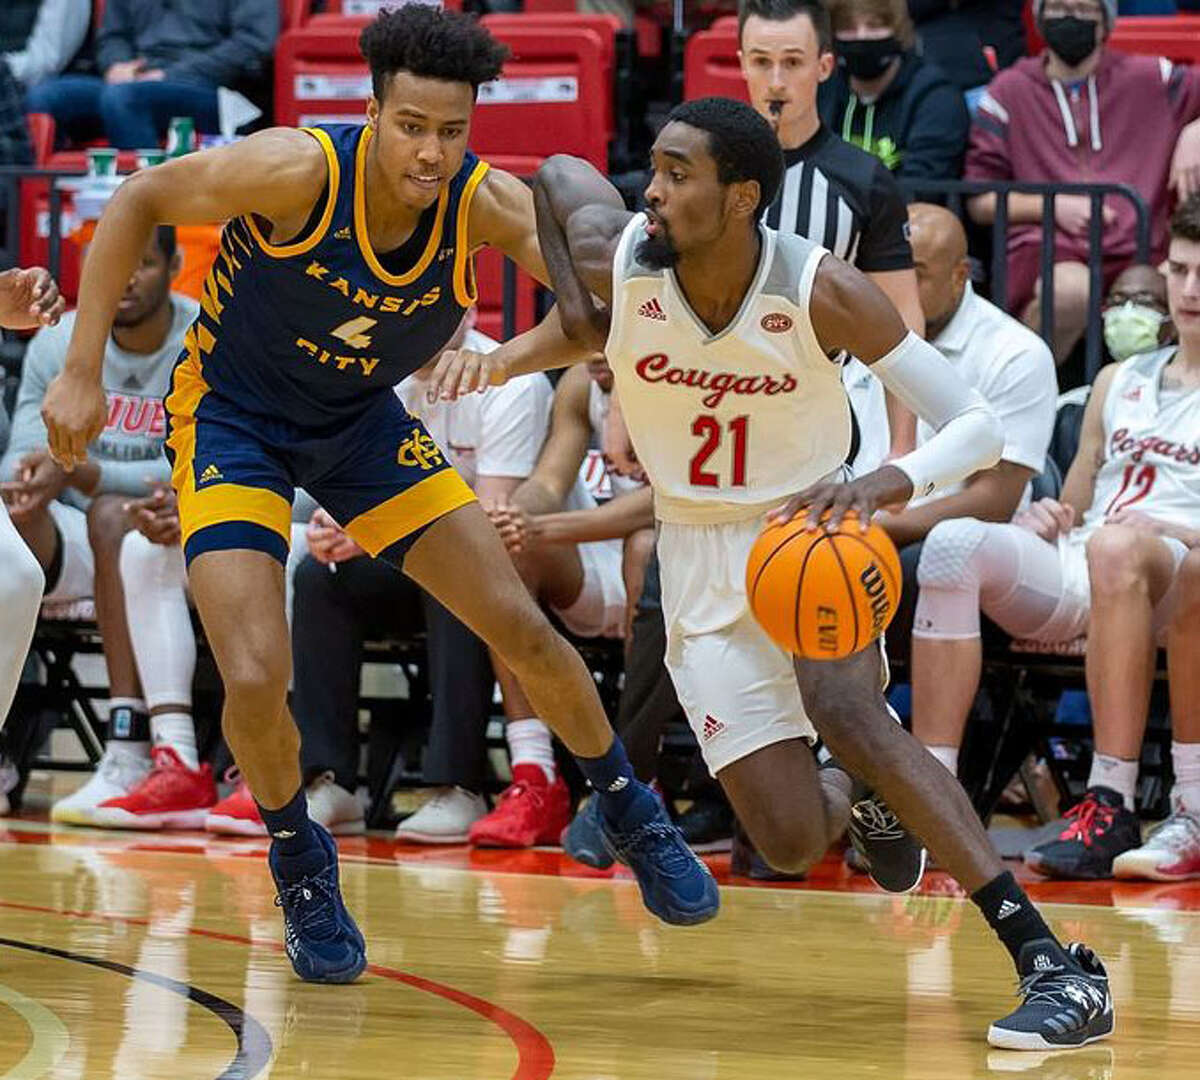 SIUE's Shaun Doss Jr. (21) drives against a Kansas City defender in a game earlier this season in Edwardsville. Doss had nine points in the Cougars' loss Saturday at Morehead State.